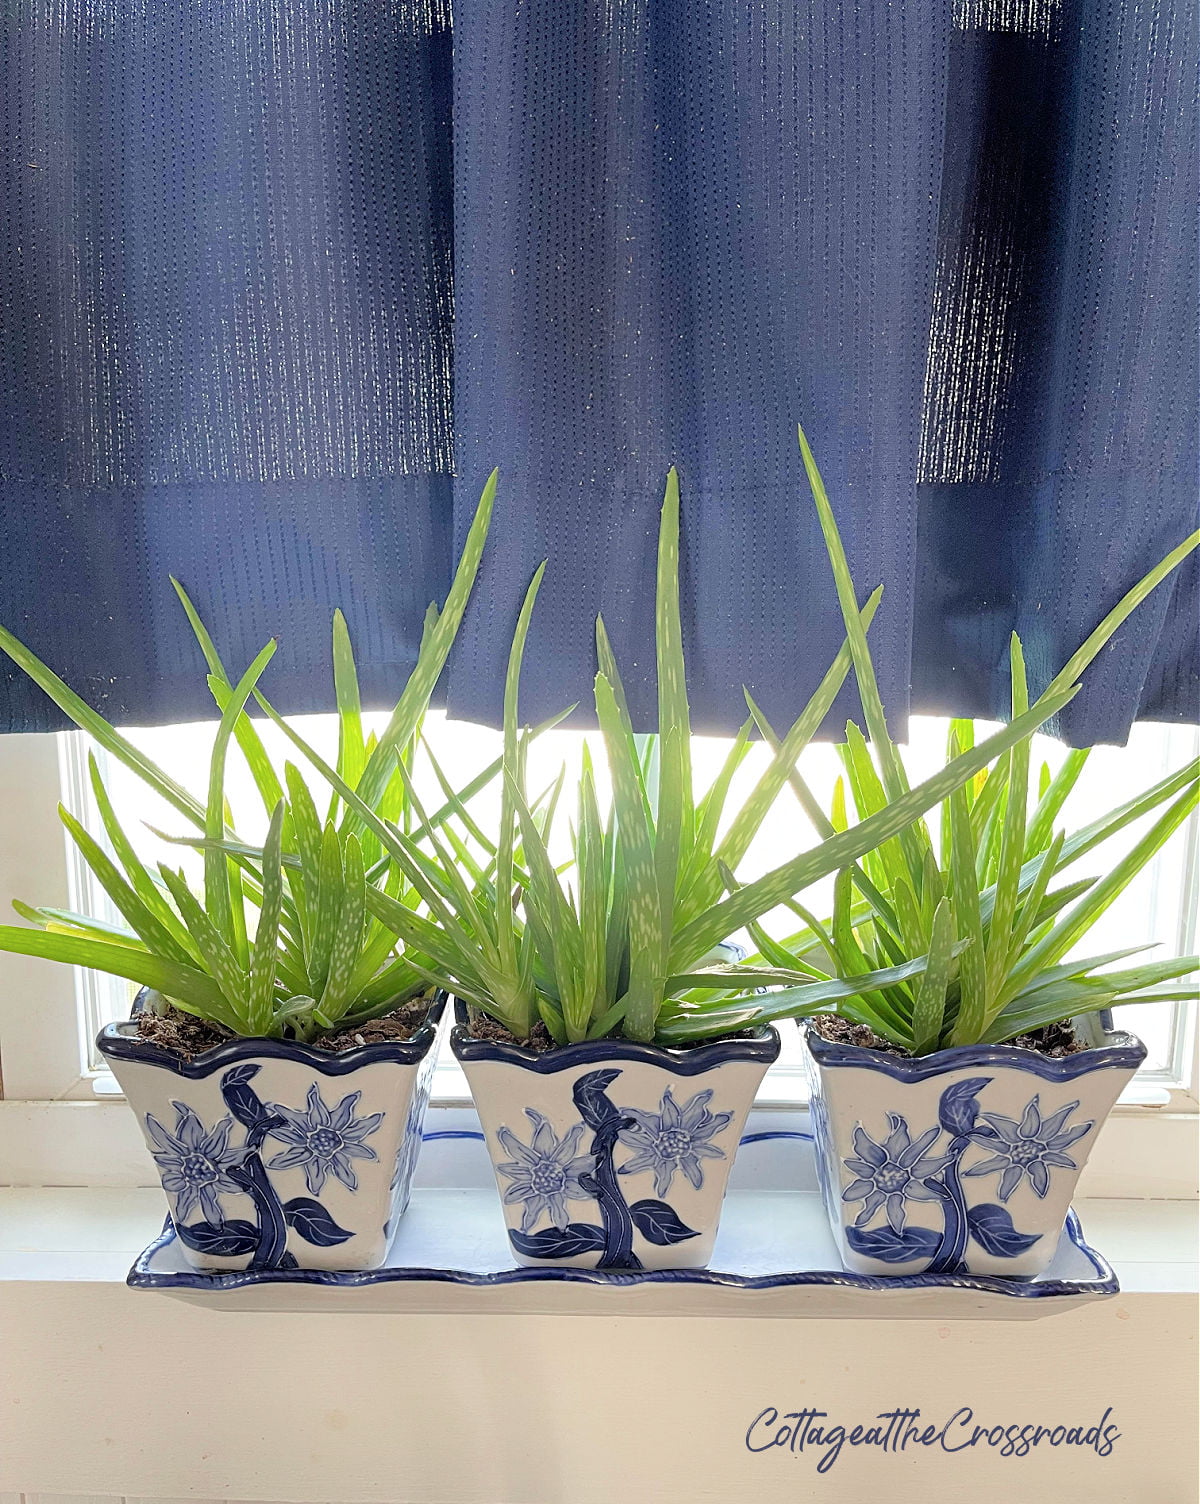 Aloe plants growing in blue and white containers